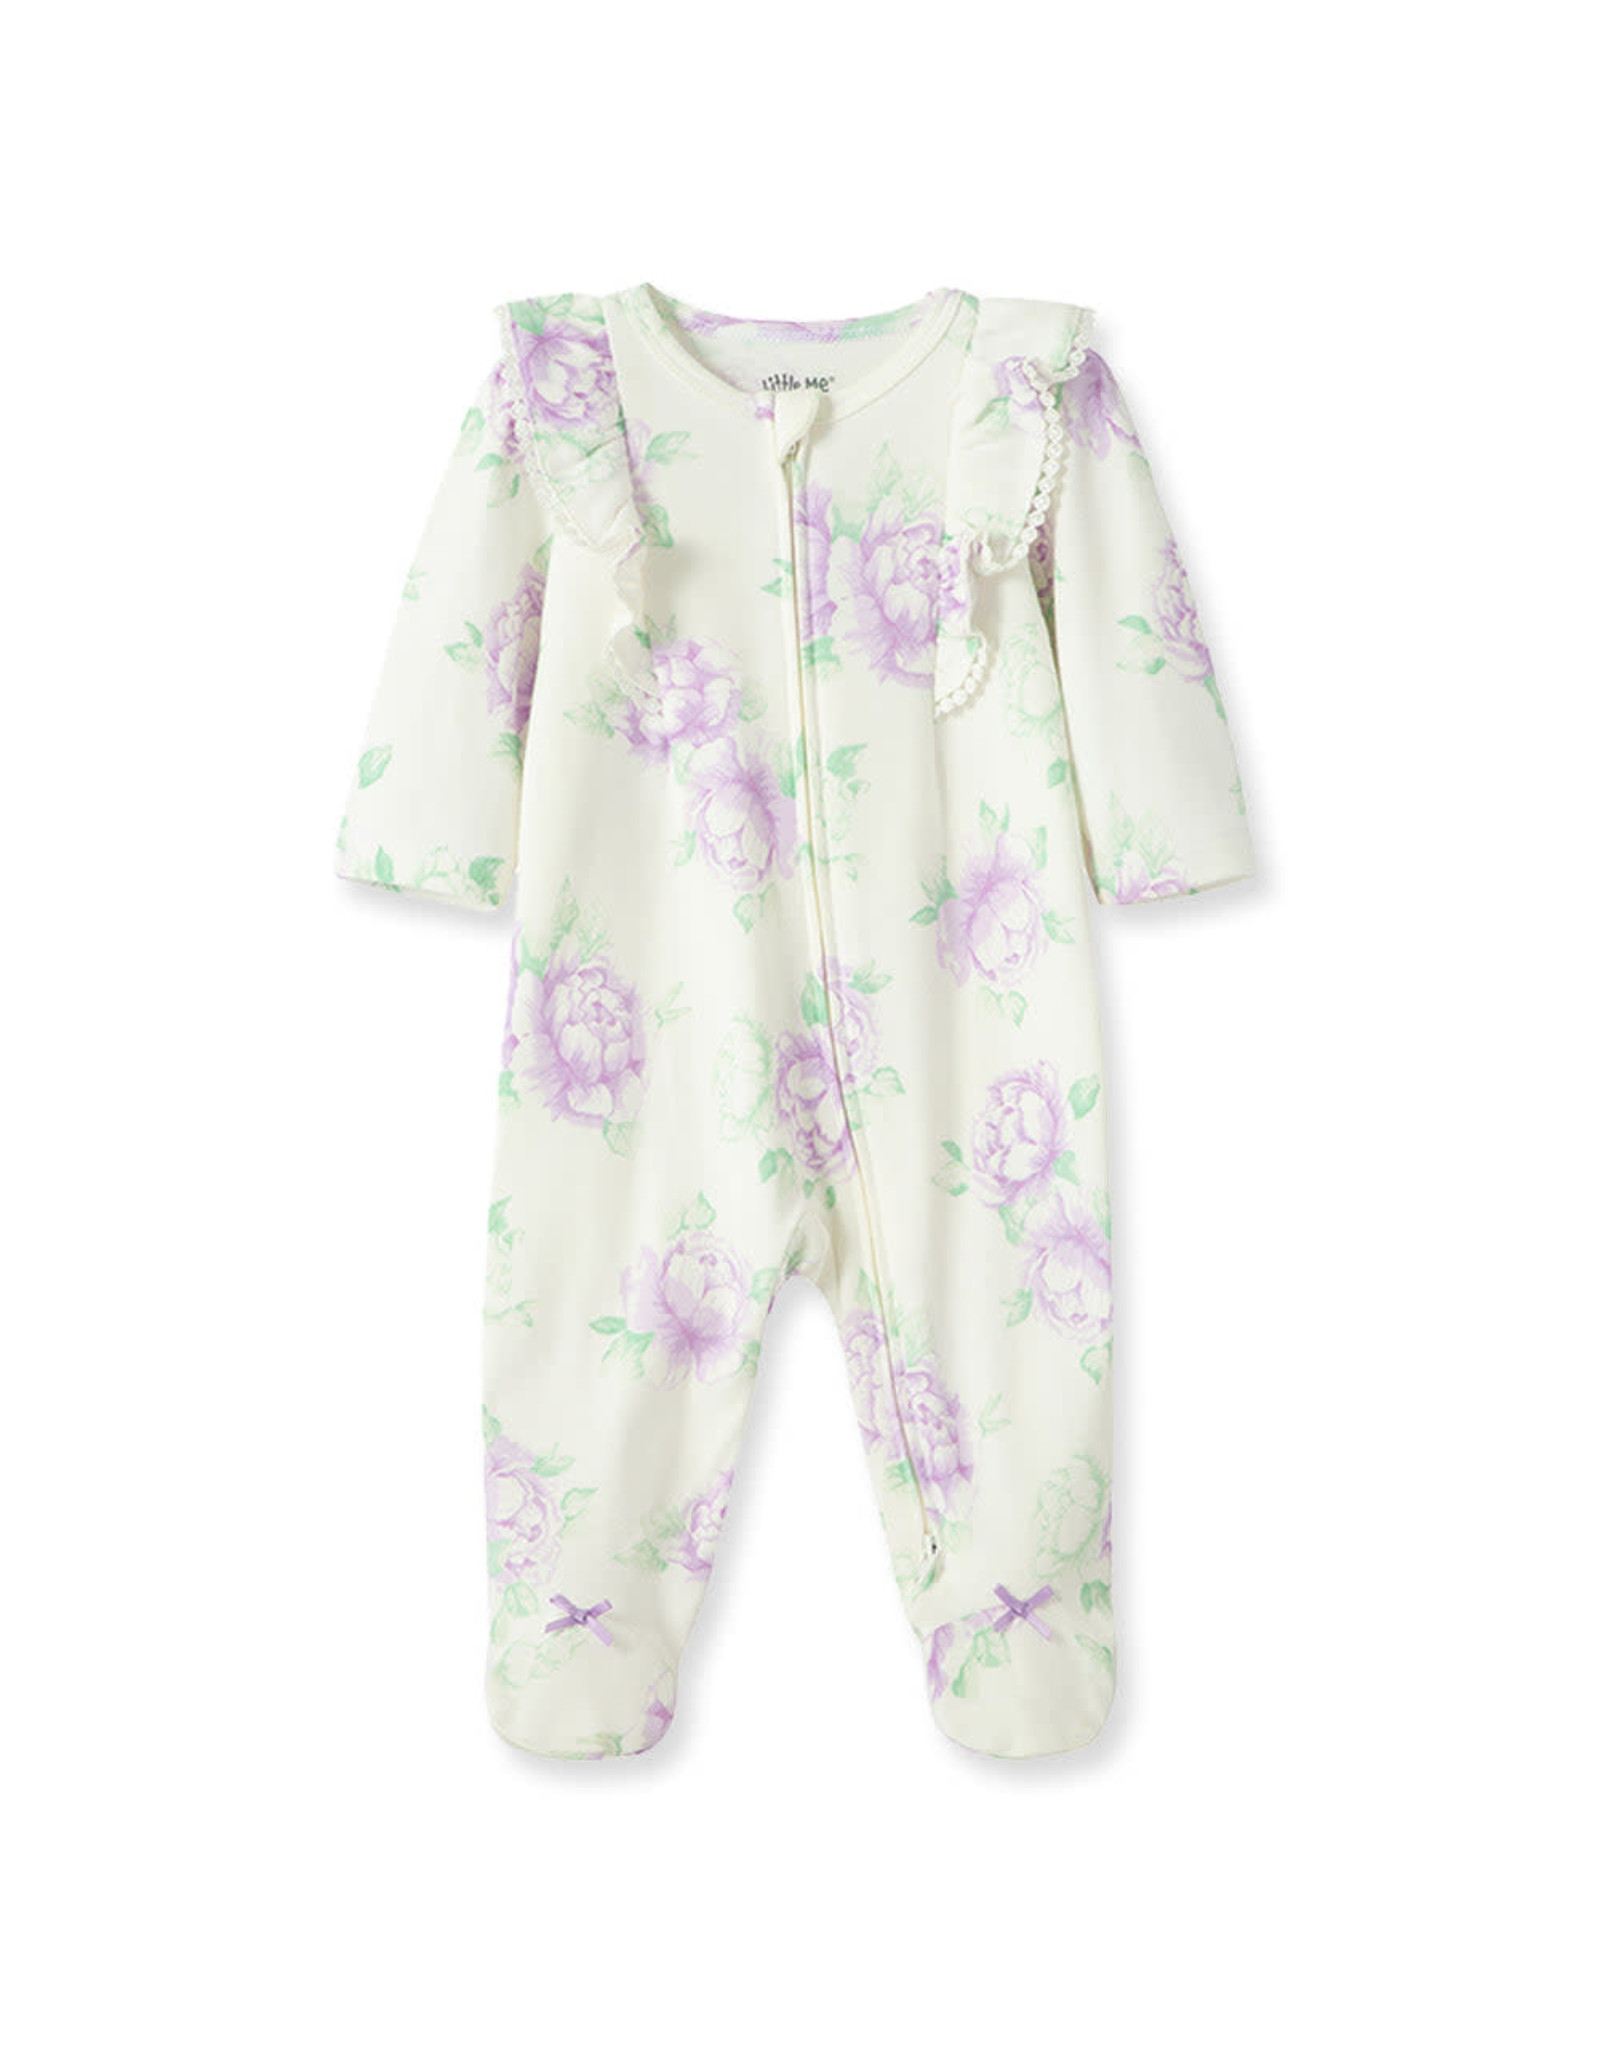 Little Me Lavish Blooms Footed One-Piece and Hat